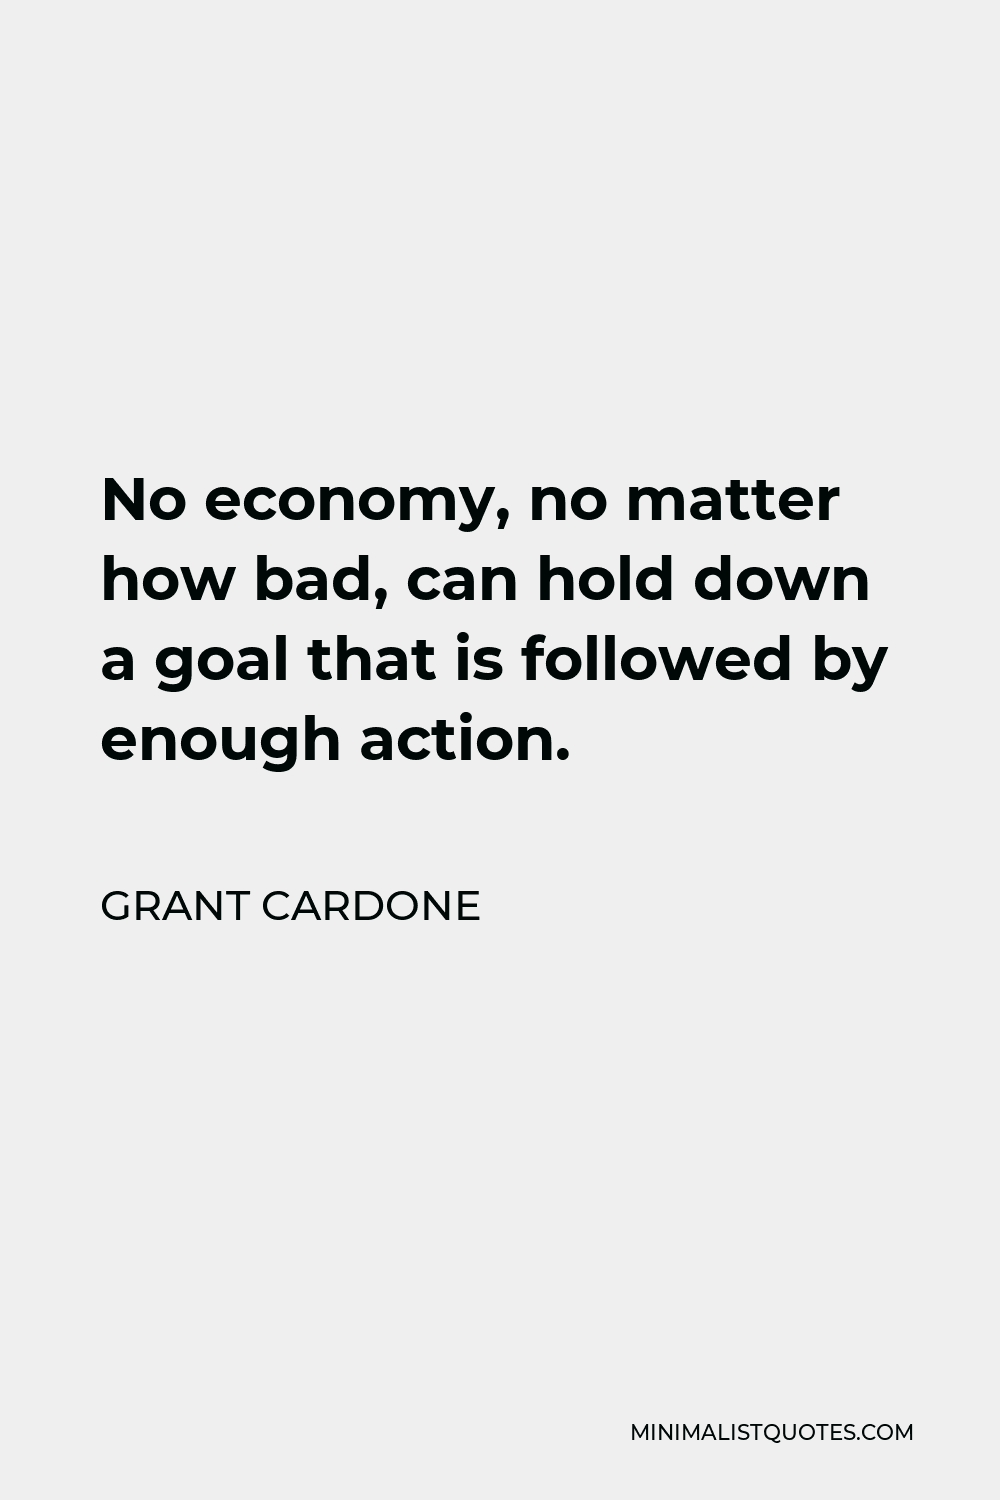 Grant Cardone Quote - No economy, no matter how bad, can hold down a goal that is followed by enough action.